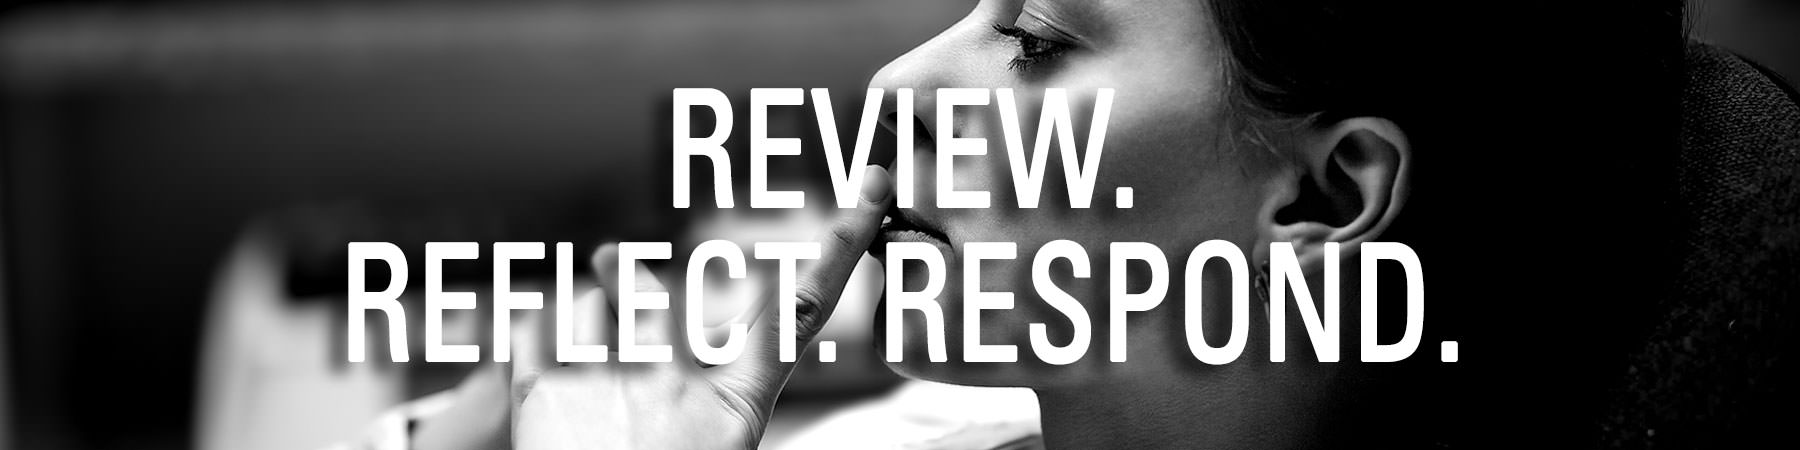 Review Reflect Respond